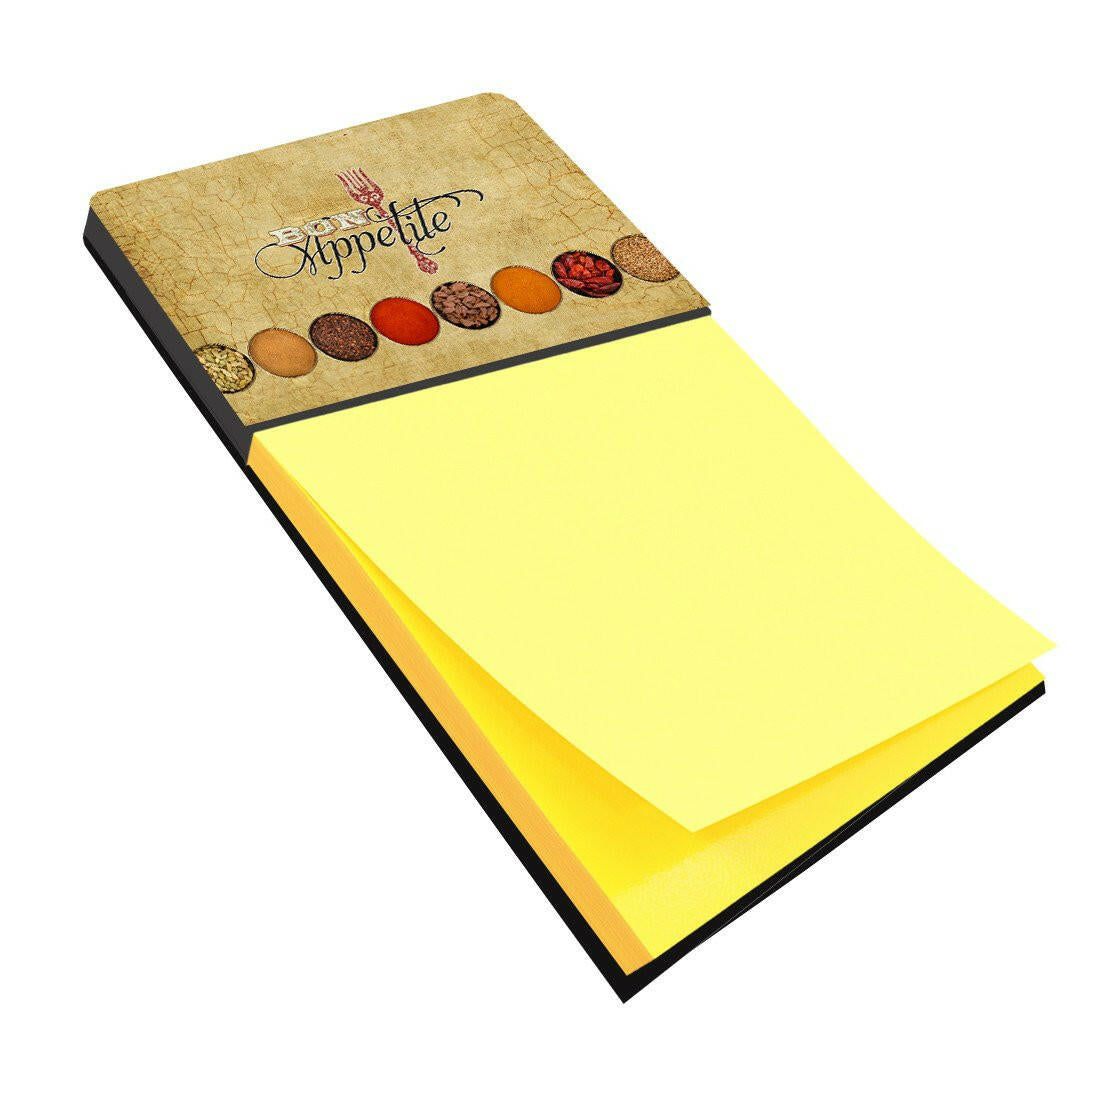 Bon Appetite and Spices Refiillable Sticky Note Holder or Postit Note Dispenser SB3089SN by Caroline's Treasures